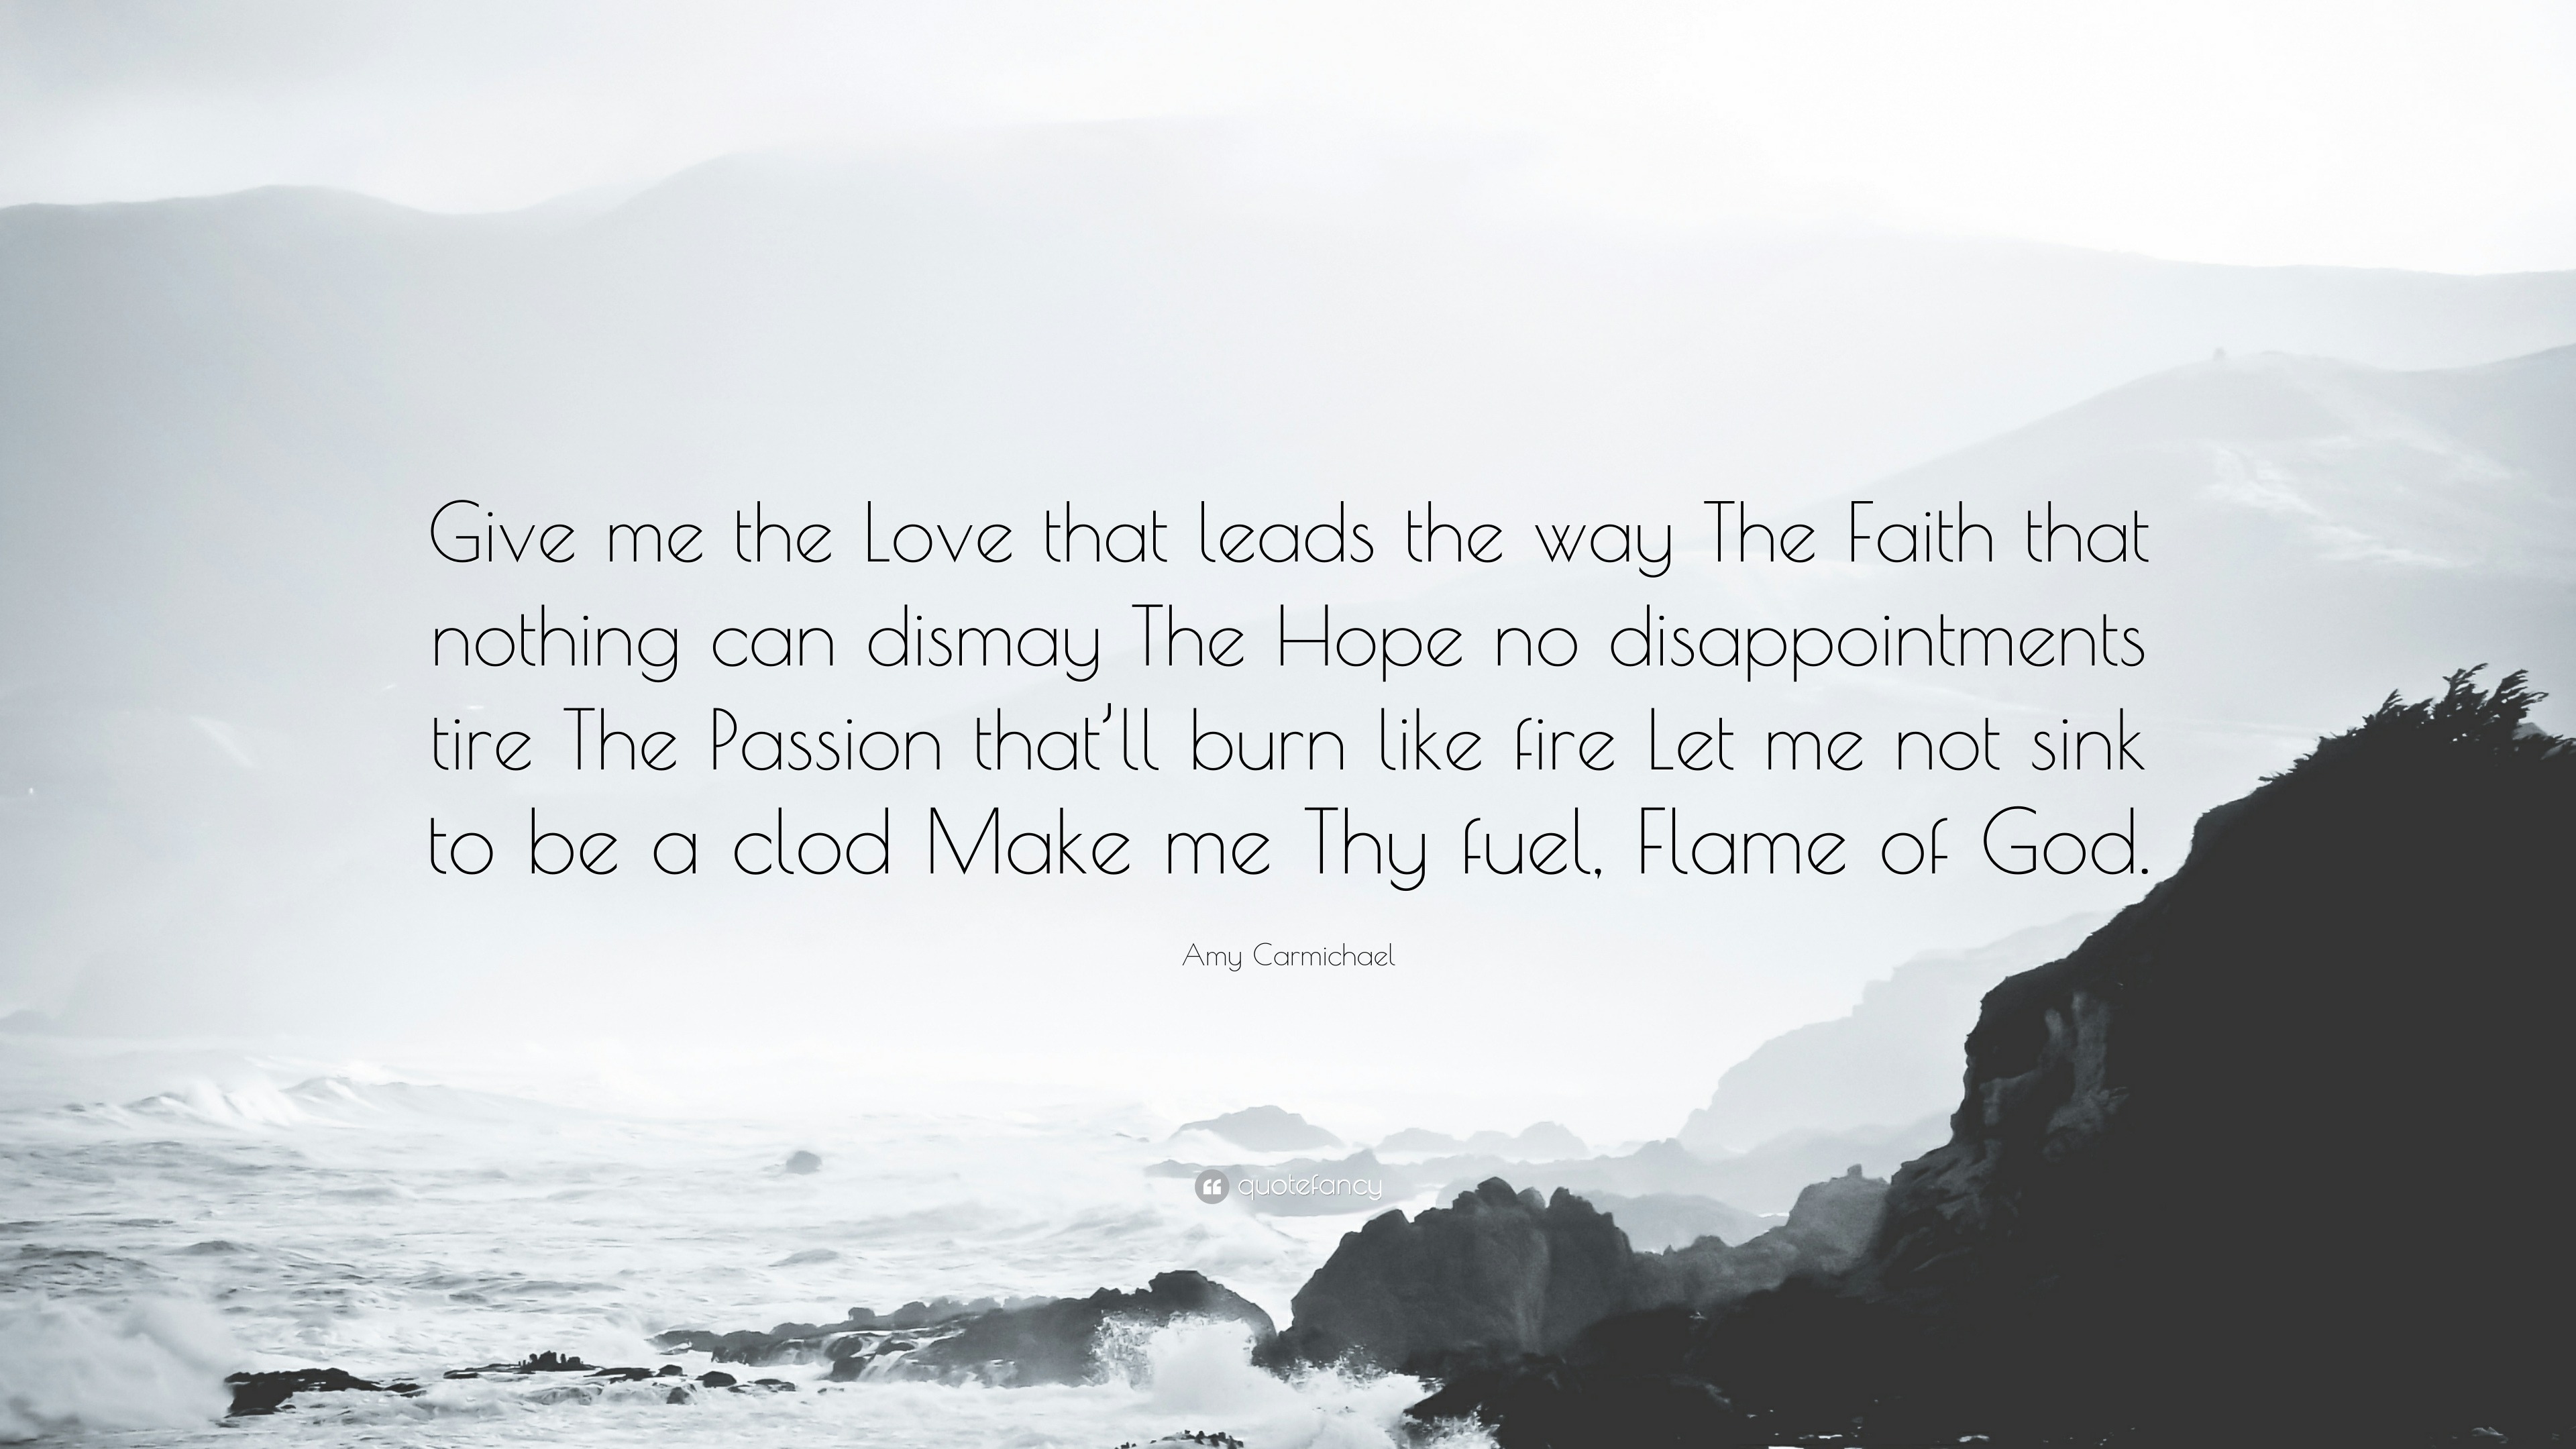 Amy Carmichael Quote “Give me the Love that leads the way The Faith that